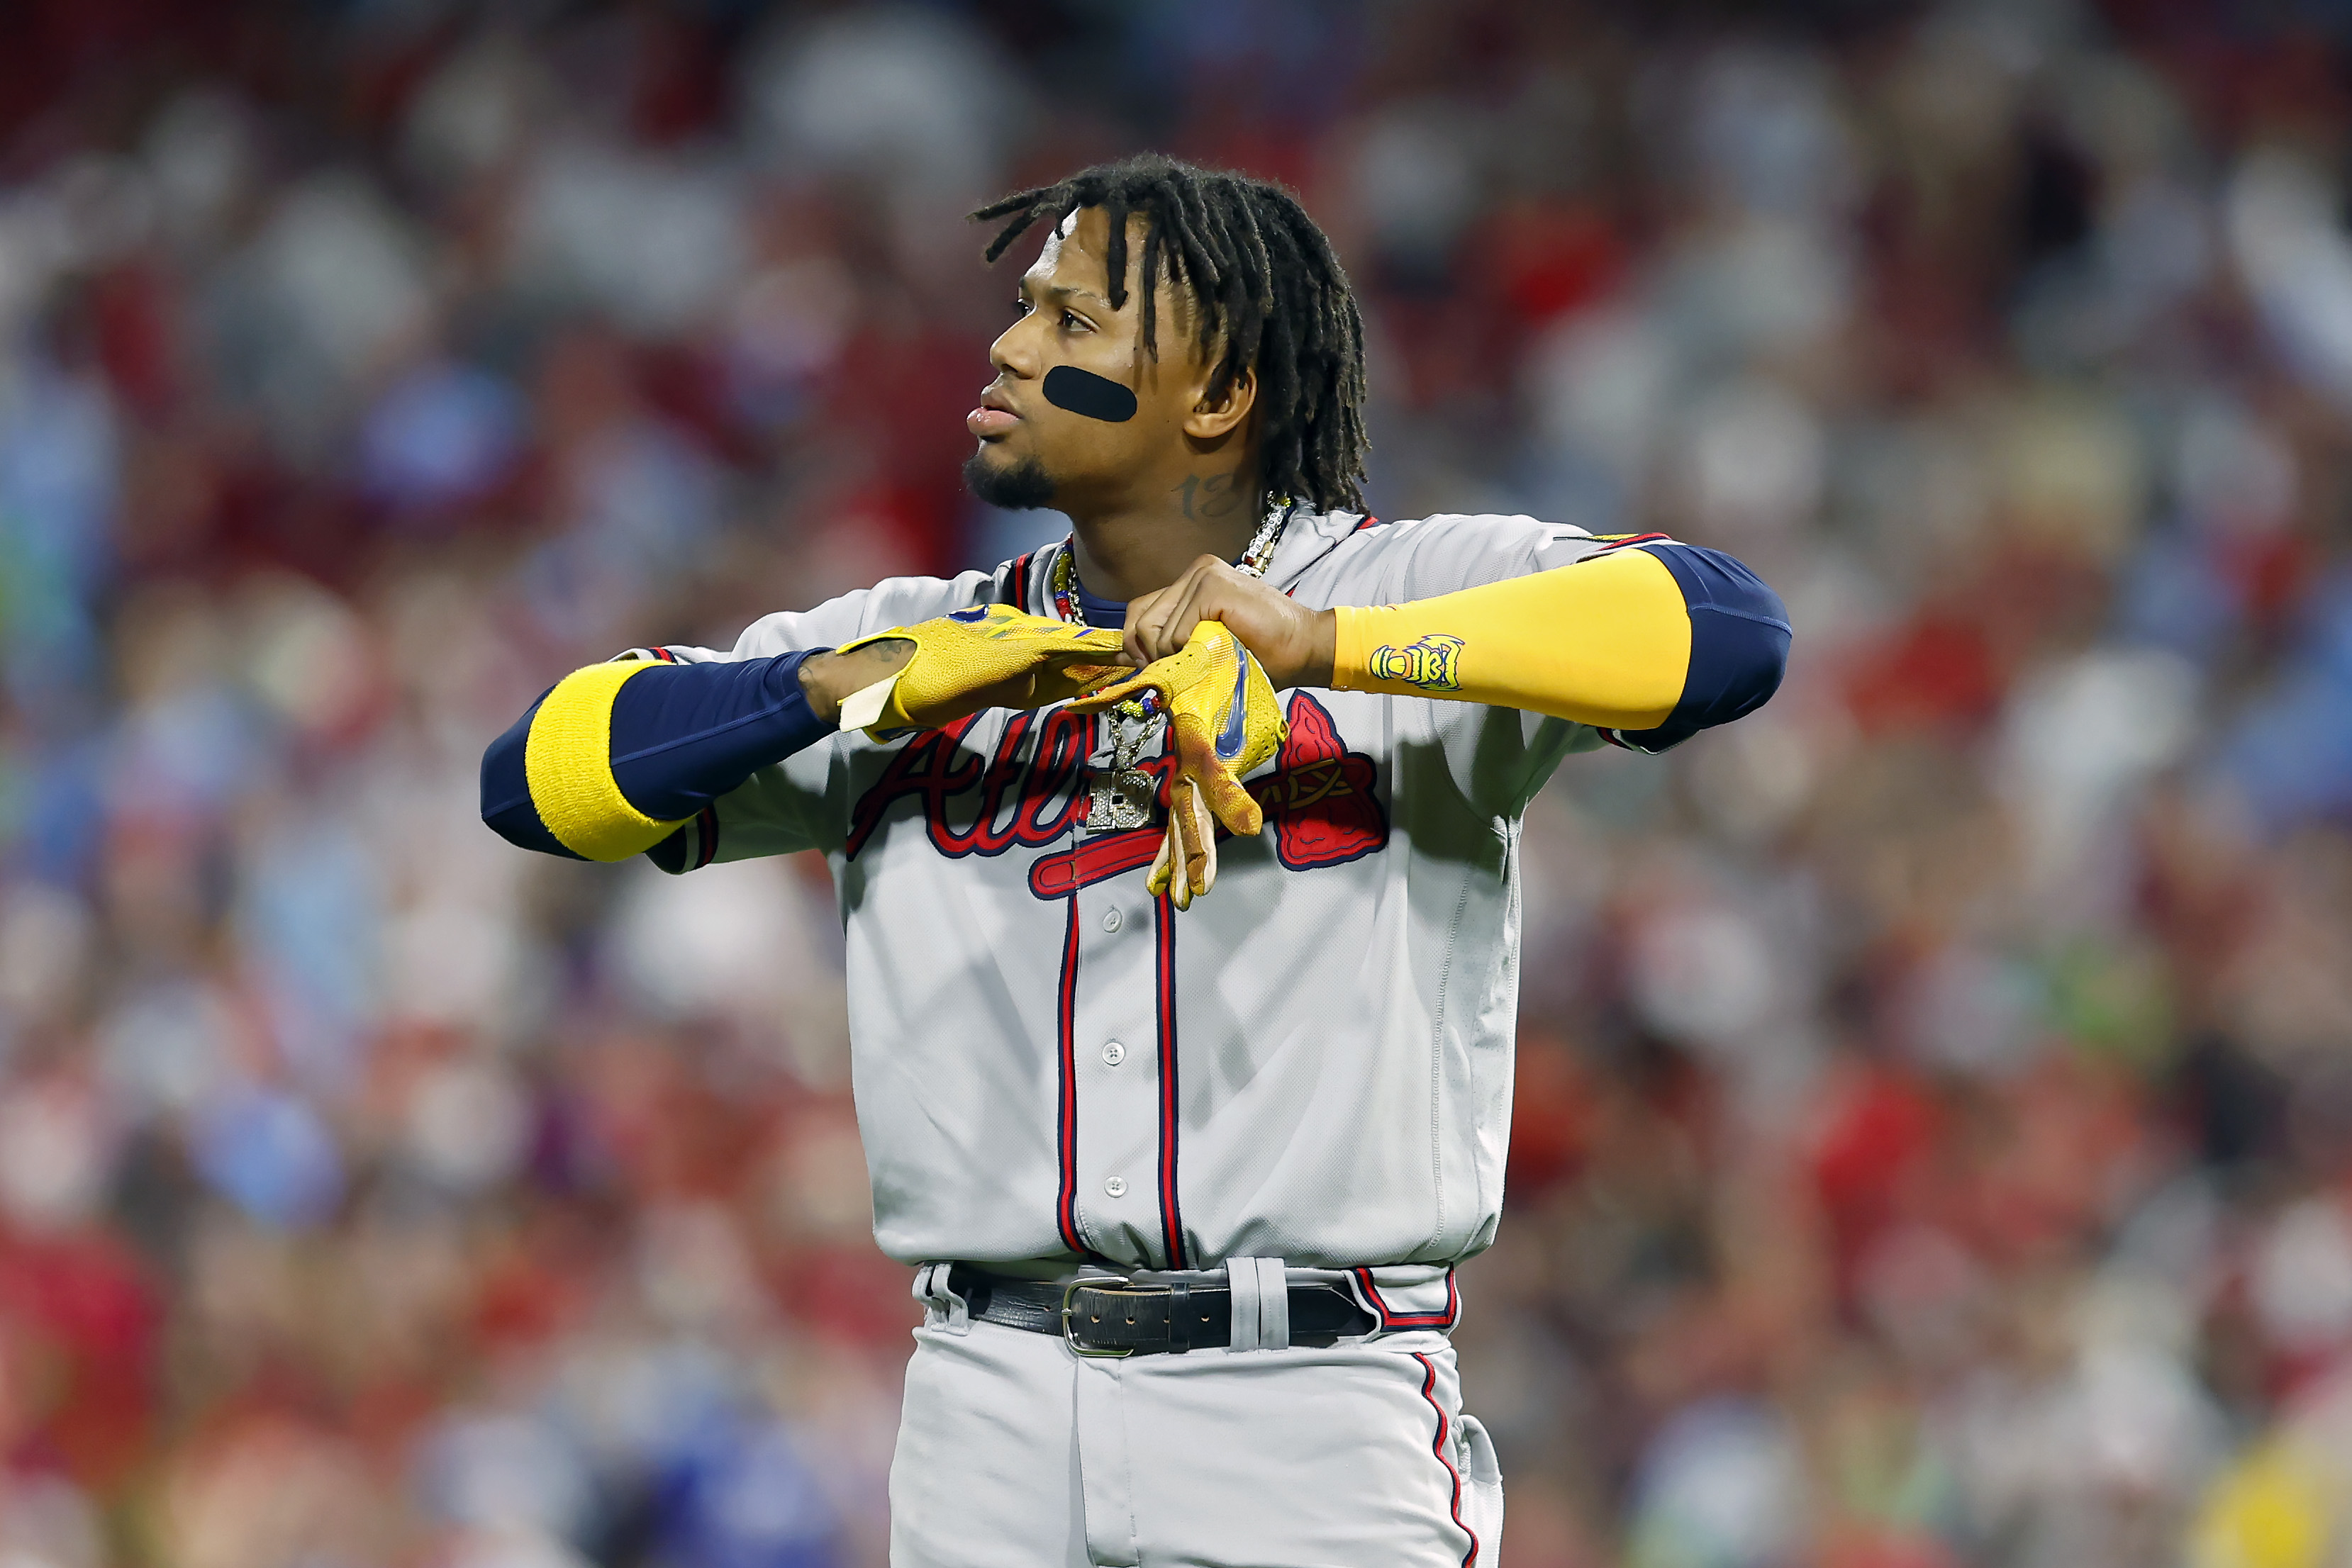 Eddie Rosario's 2 homers helps power Braves to big win and 3-1